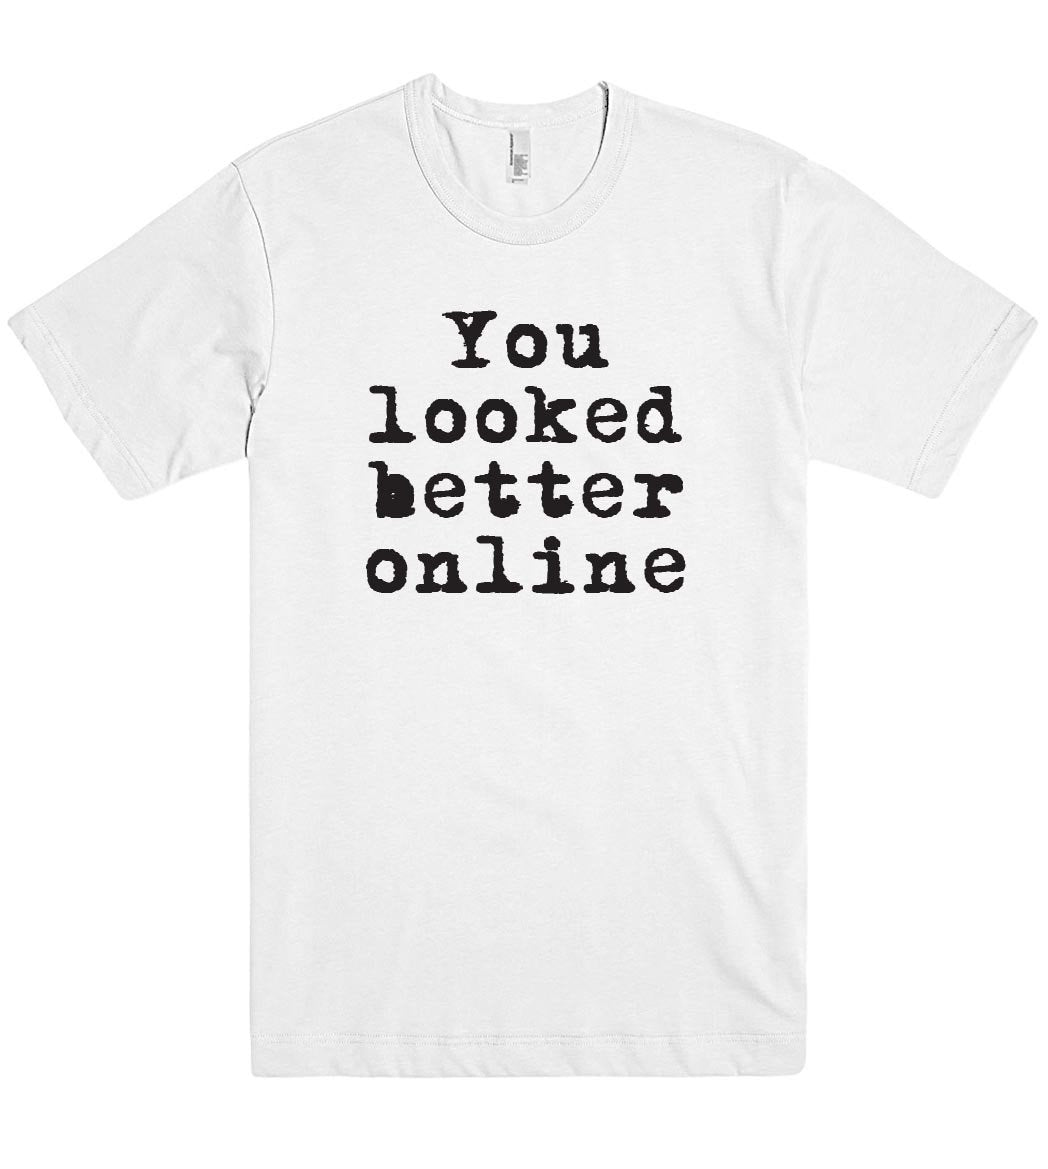 You looked better online t shirt - Shirtoopia